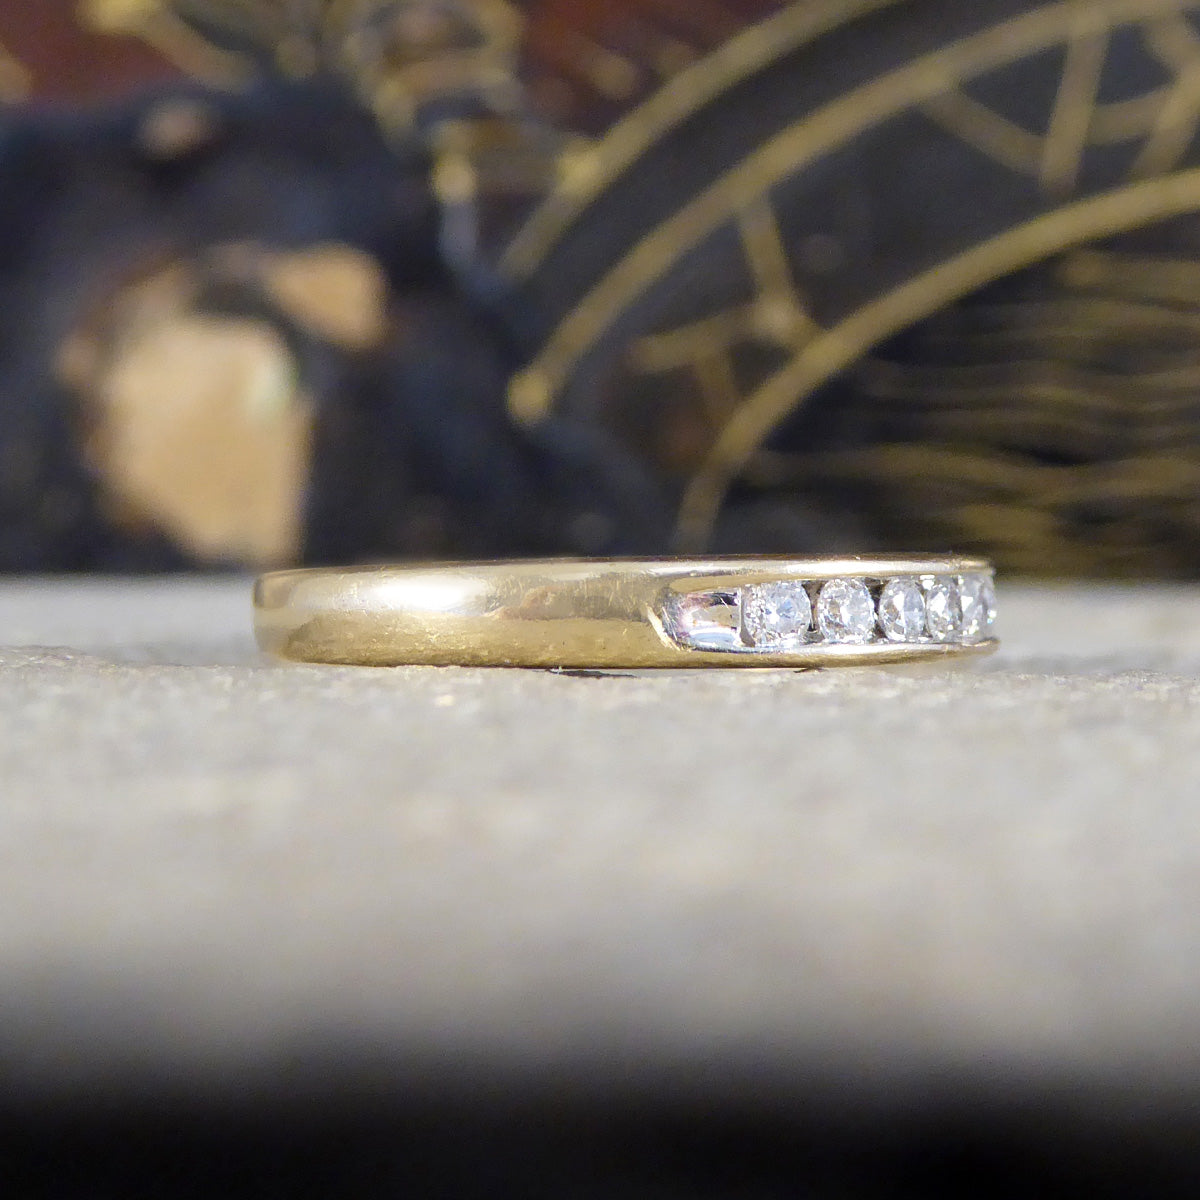 0.25ct Diamond Channel Set Half Eternity Ring in 9ct Yellow Gold